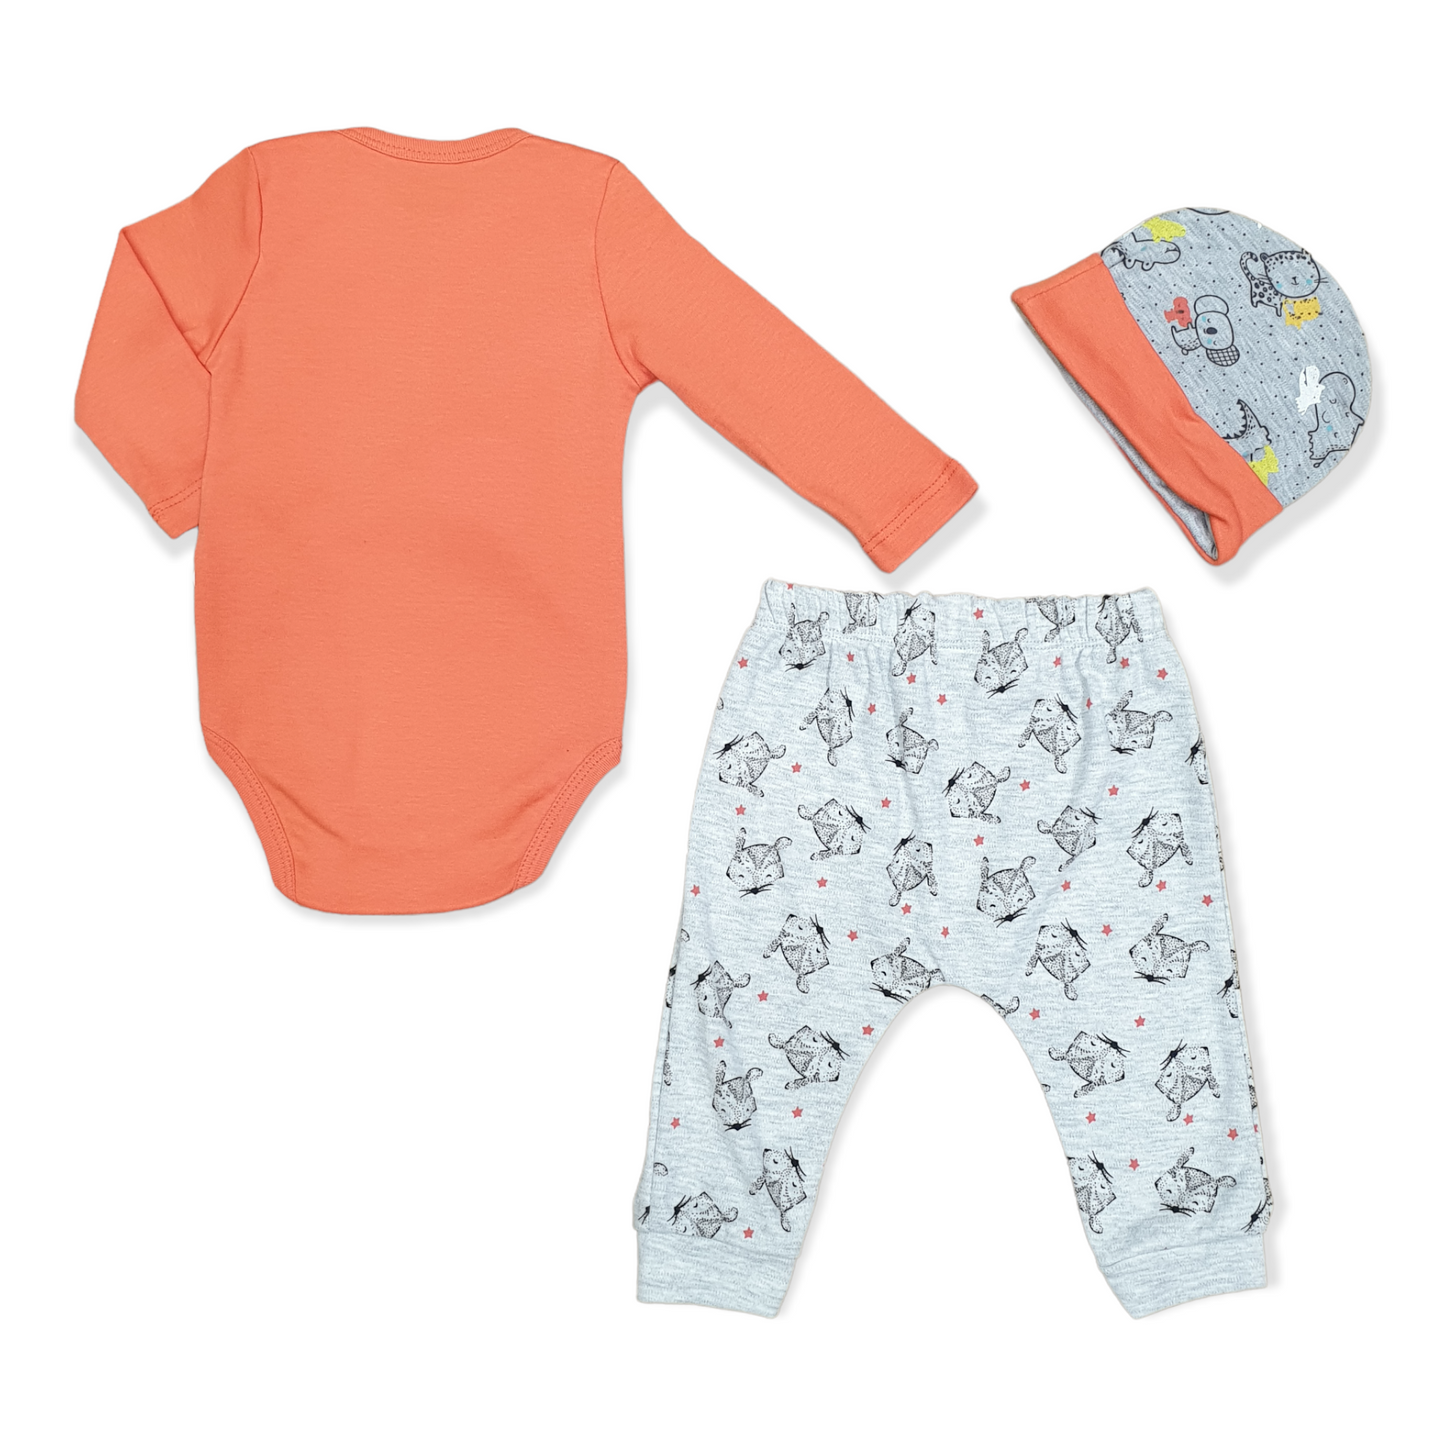 Orange Little Families Unisex Body with Pants and Cap